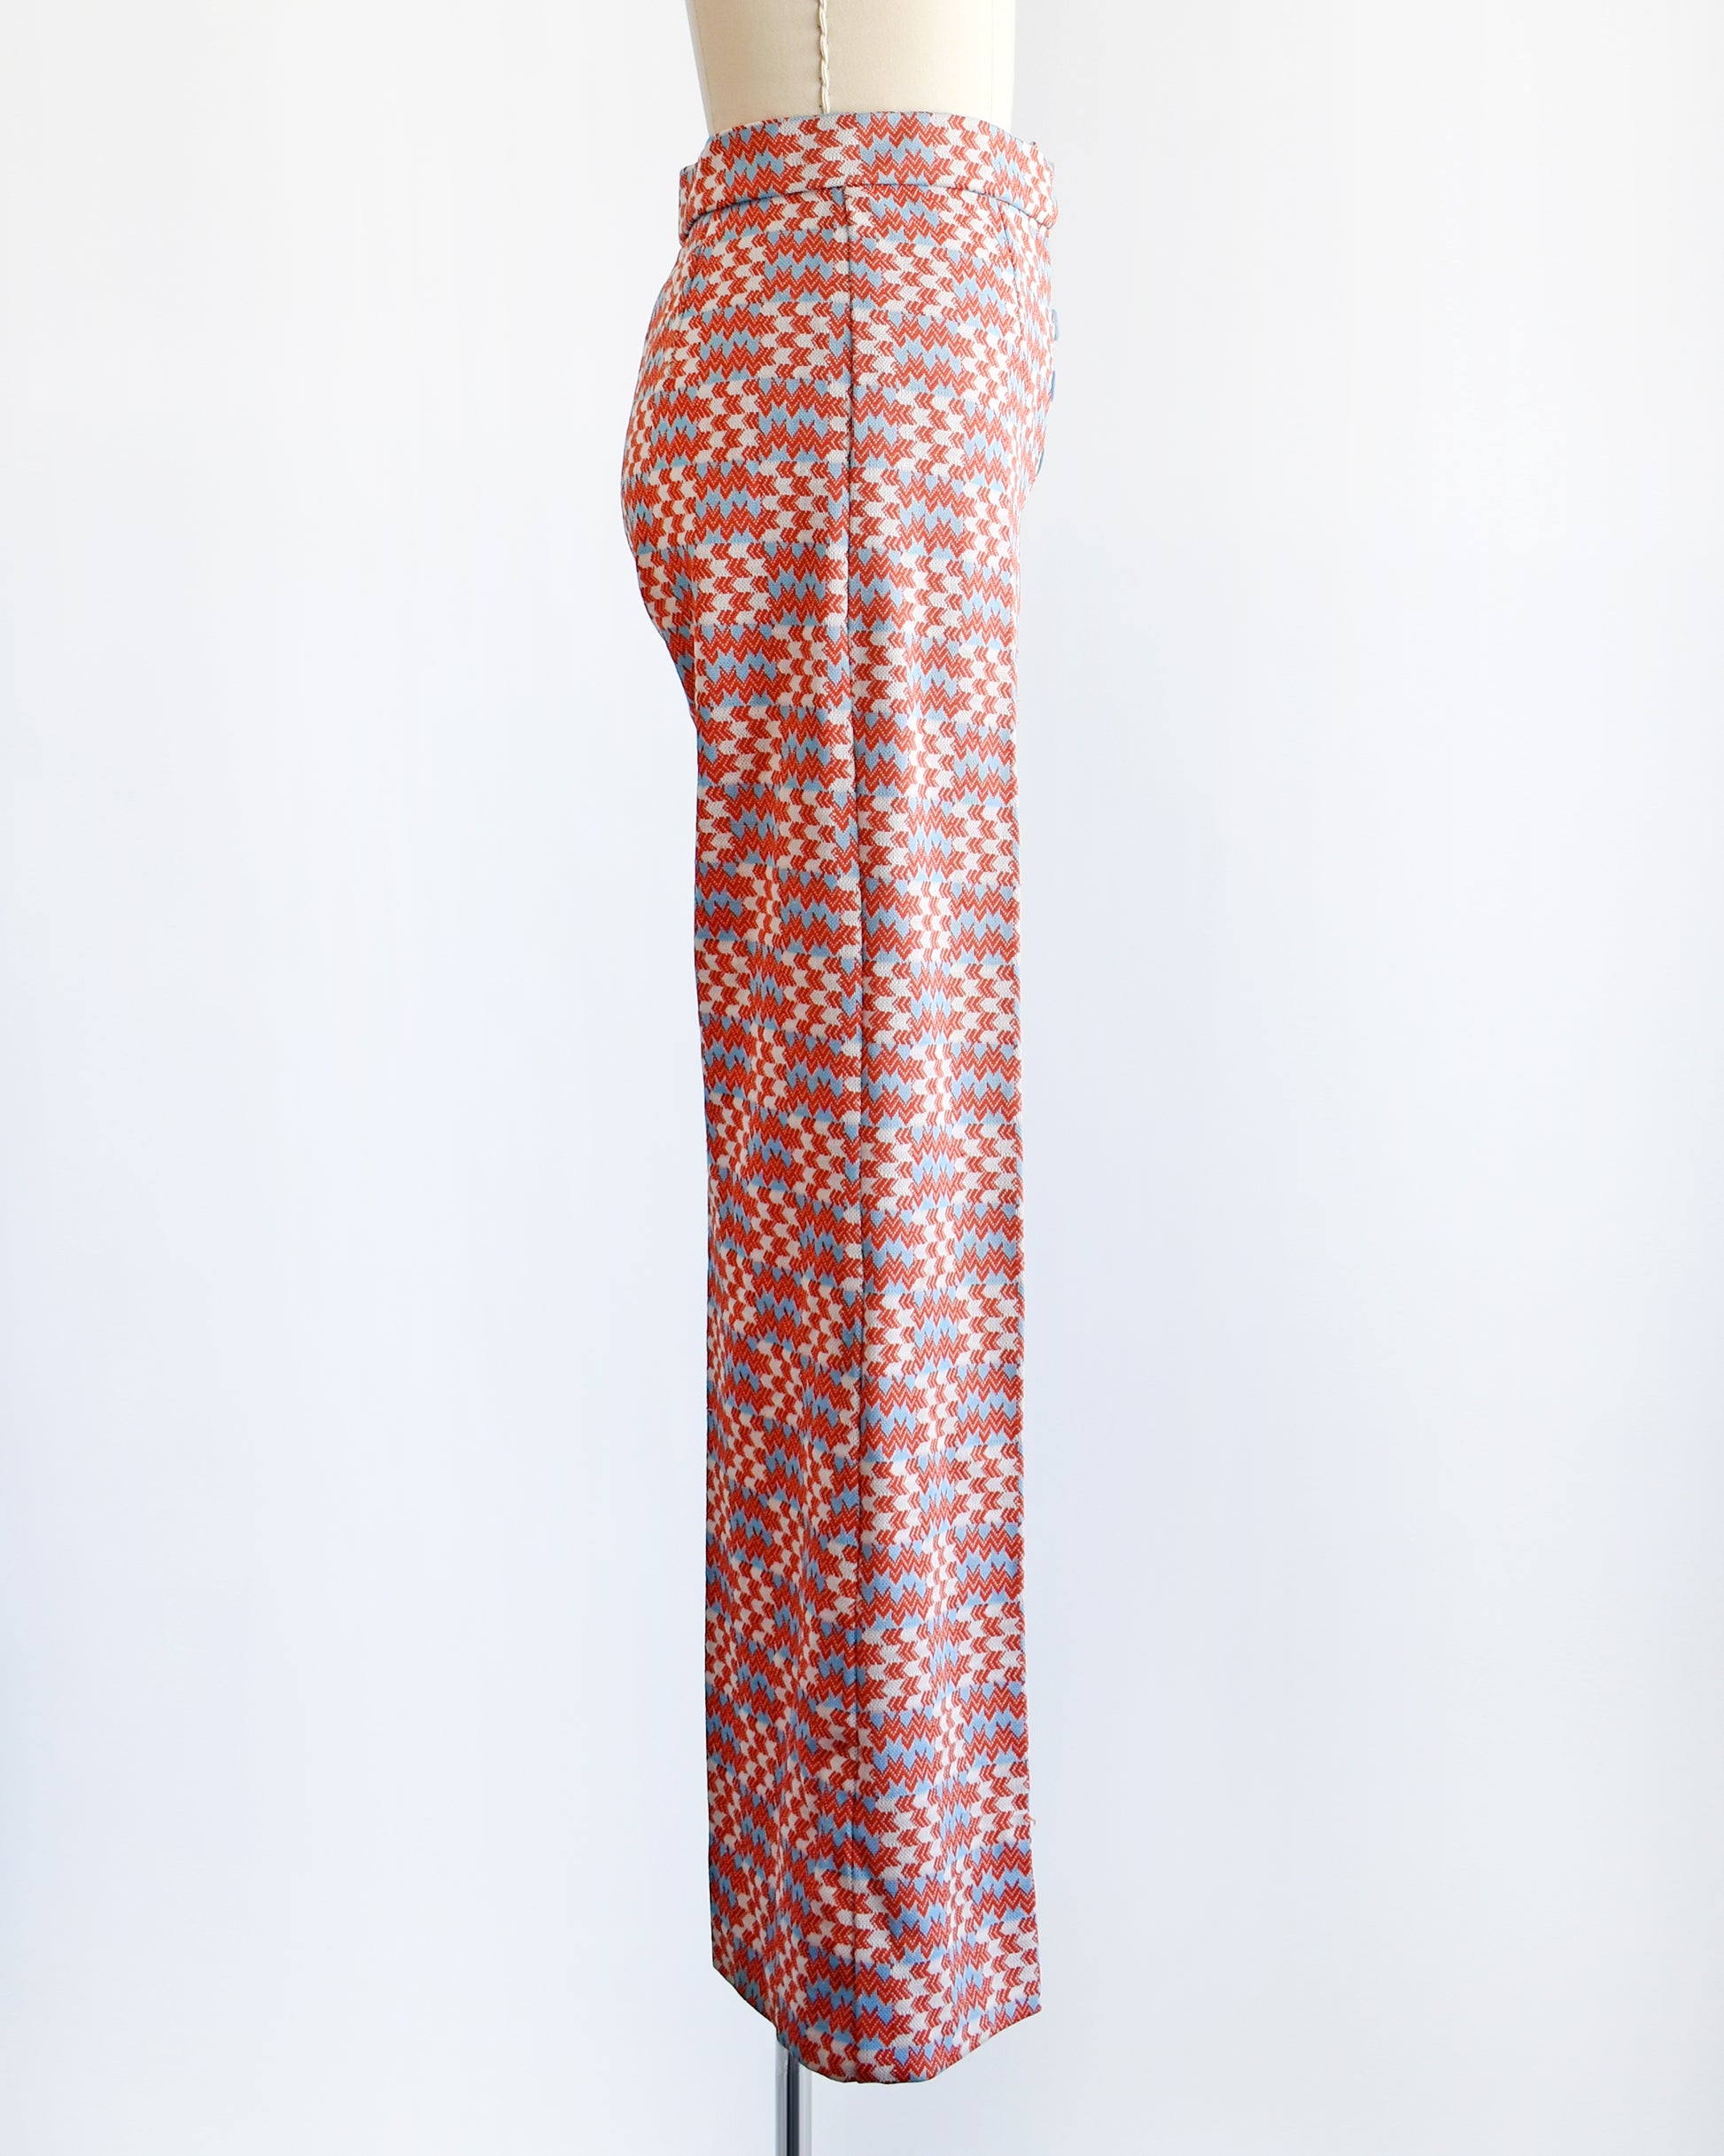 side view of a vintage 1970s wide leg pants feature a vibrant print with dark orange, white, and light blue arrows pointing in various directions down the legs.